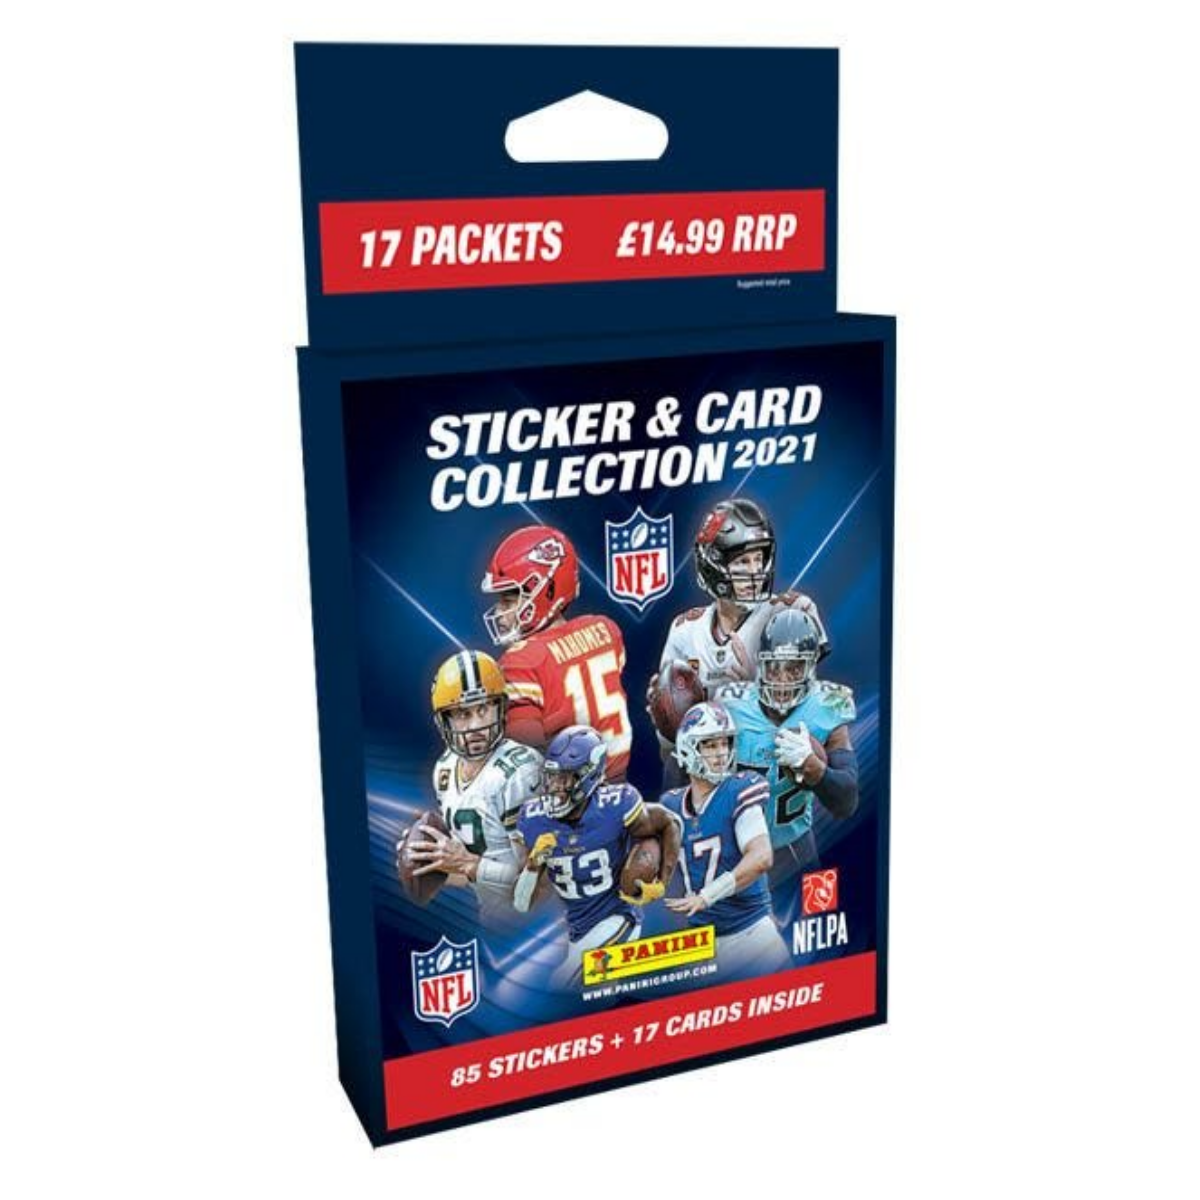 2021 Sticker And Card Collection Panini NFL for sale online